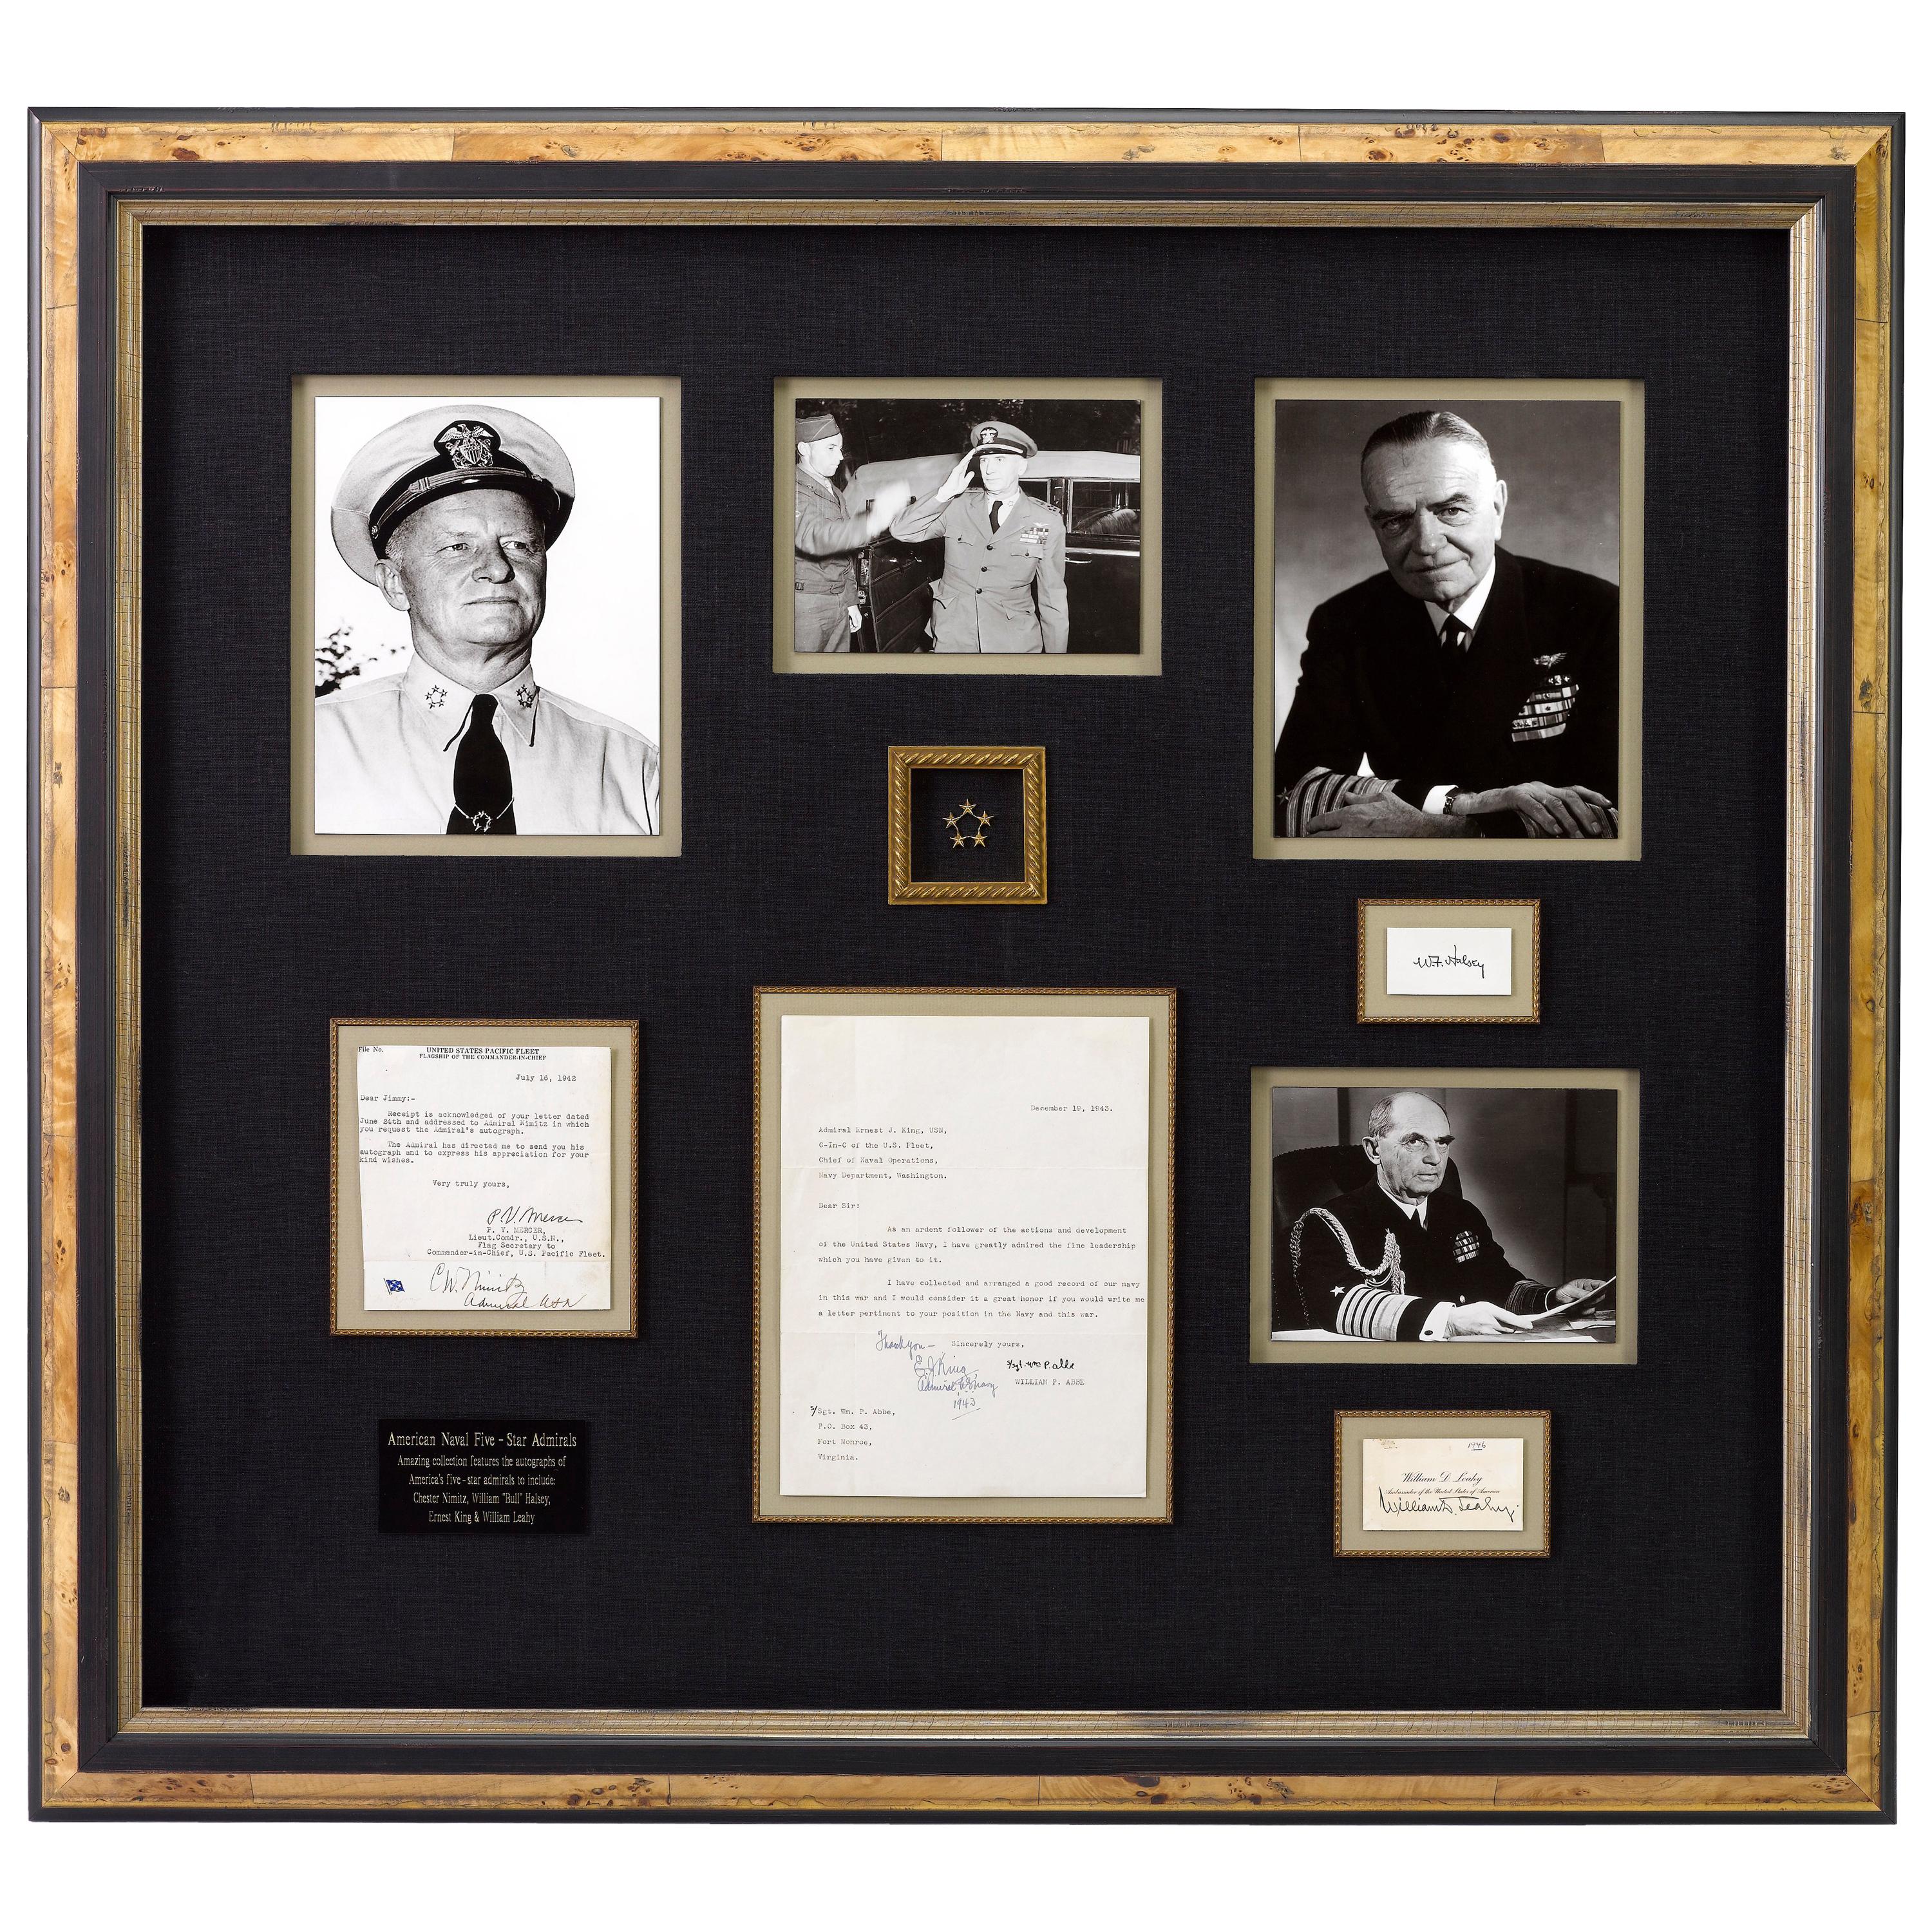 Navy Five-Star Admirals Signatures, United States World War II For Sale at 1stDibs navy collectibles, last 5 star admiral, us navy admiral collectibles